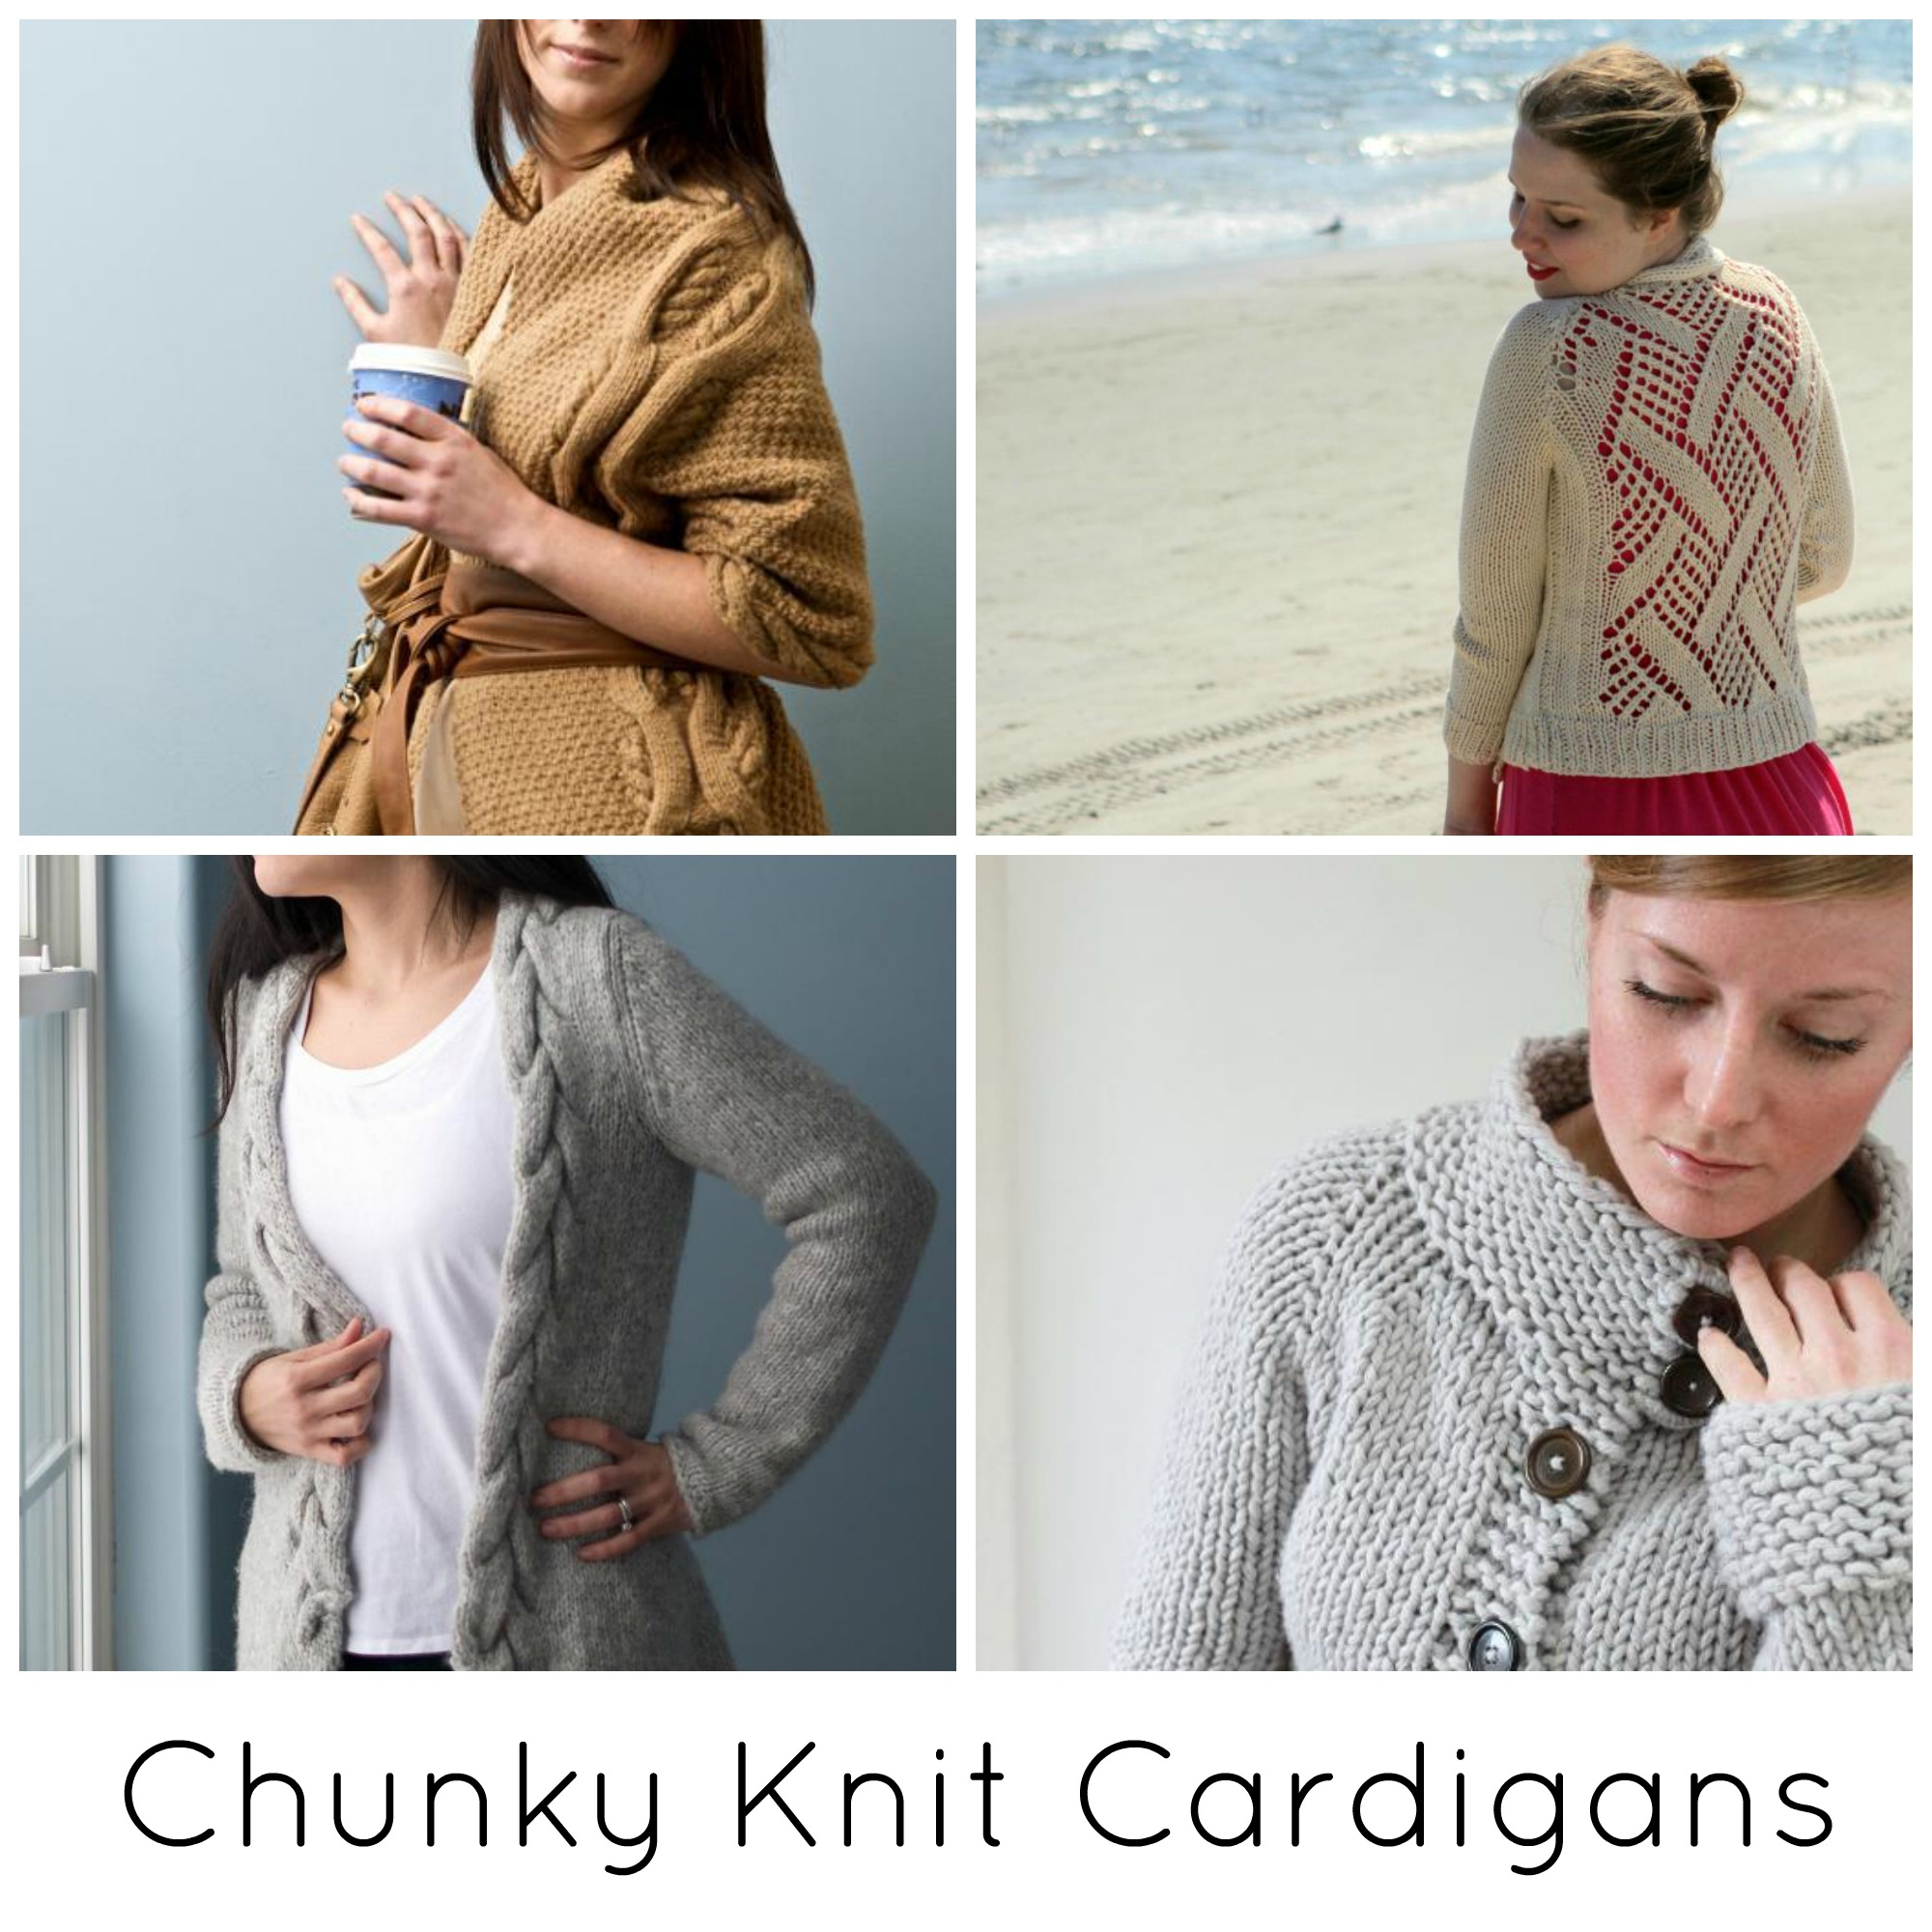 Free Knitted Cardigan Patterns The Coziest Chunky Knit Cardigan Patterns Ever